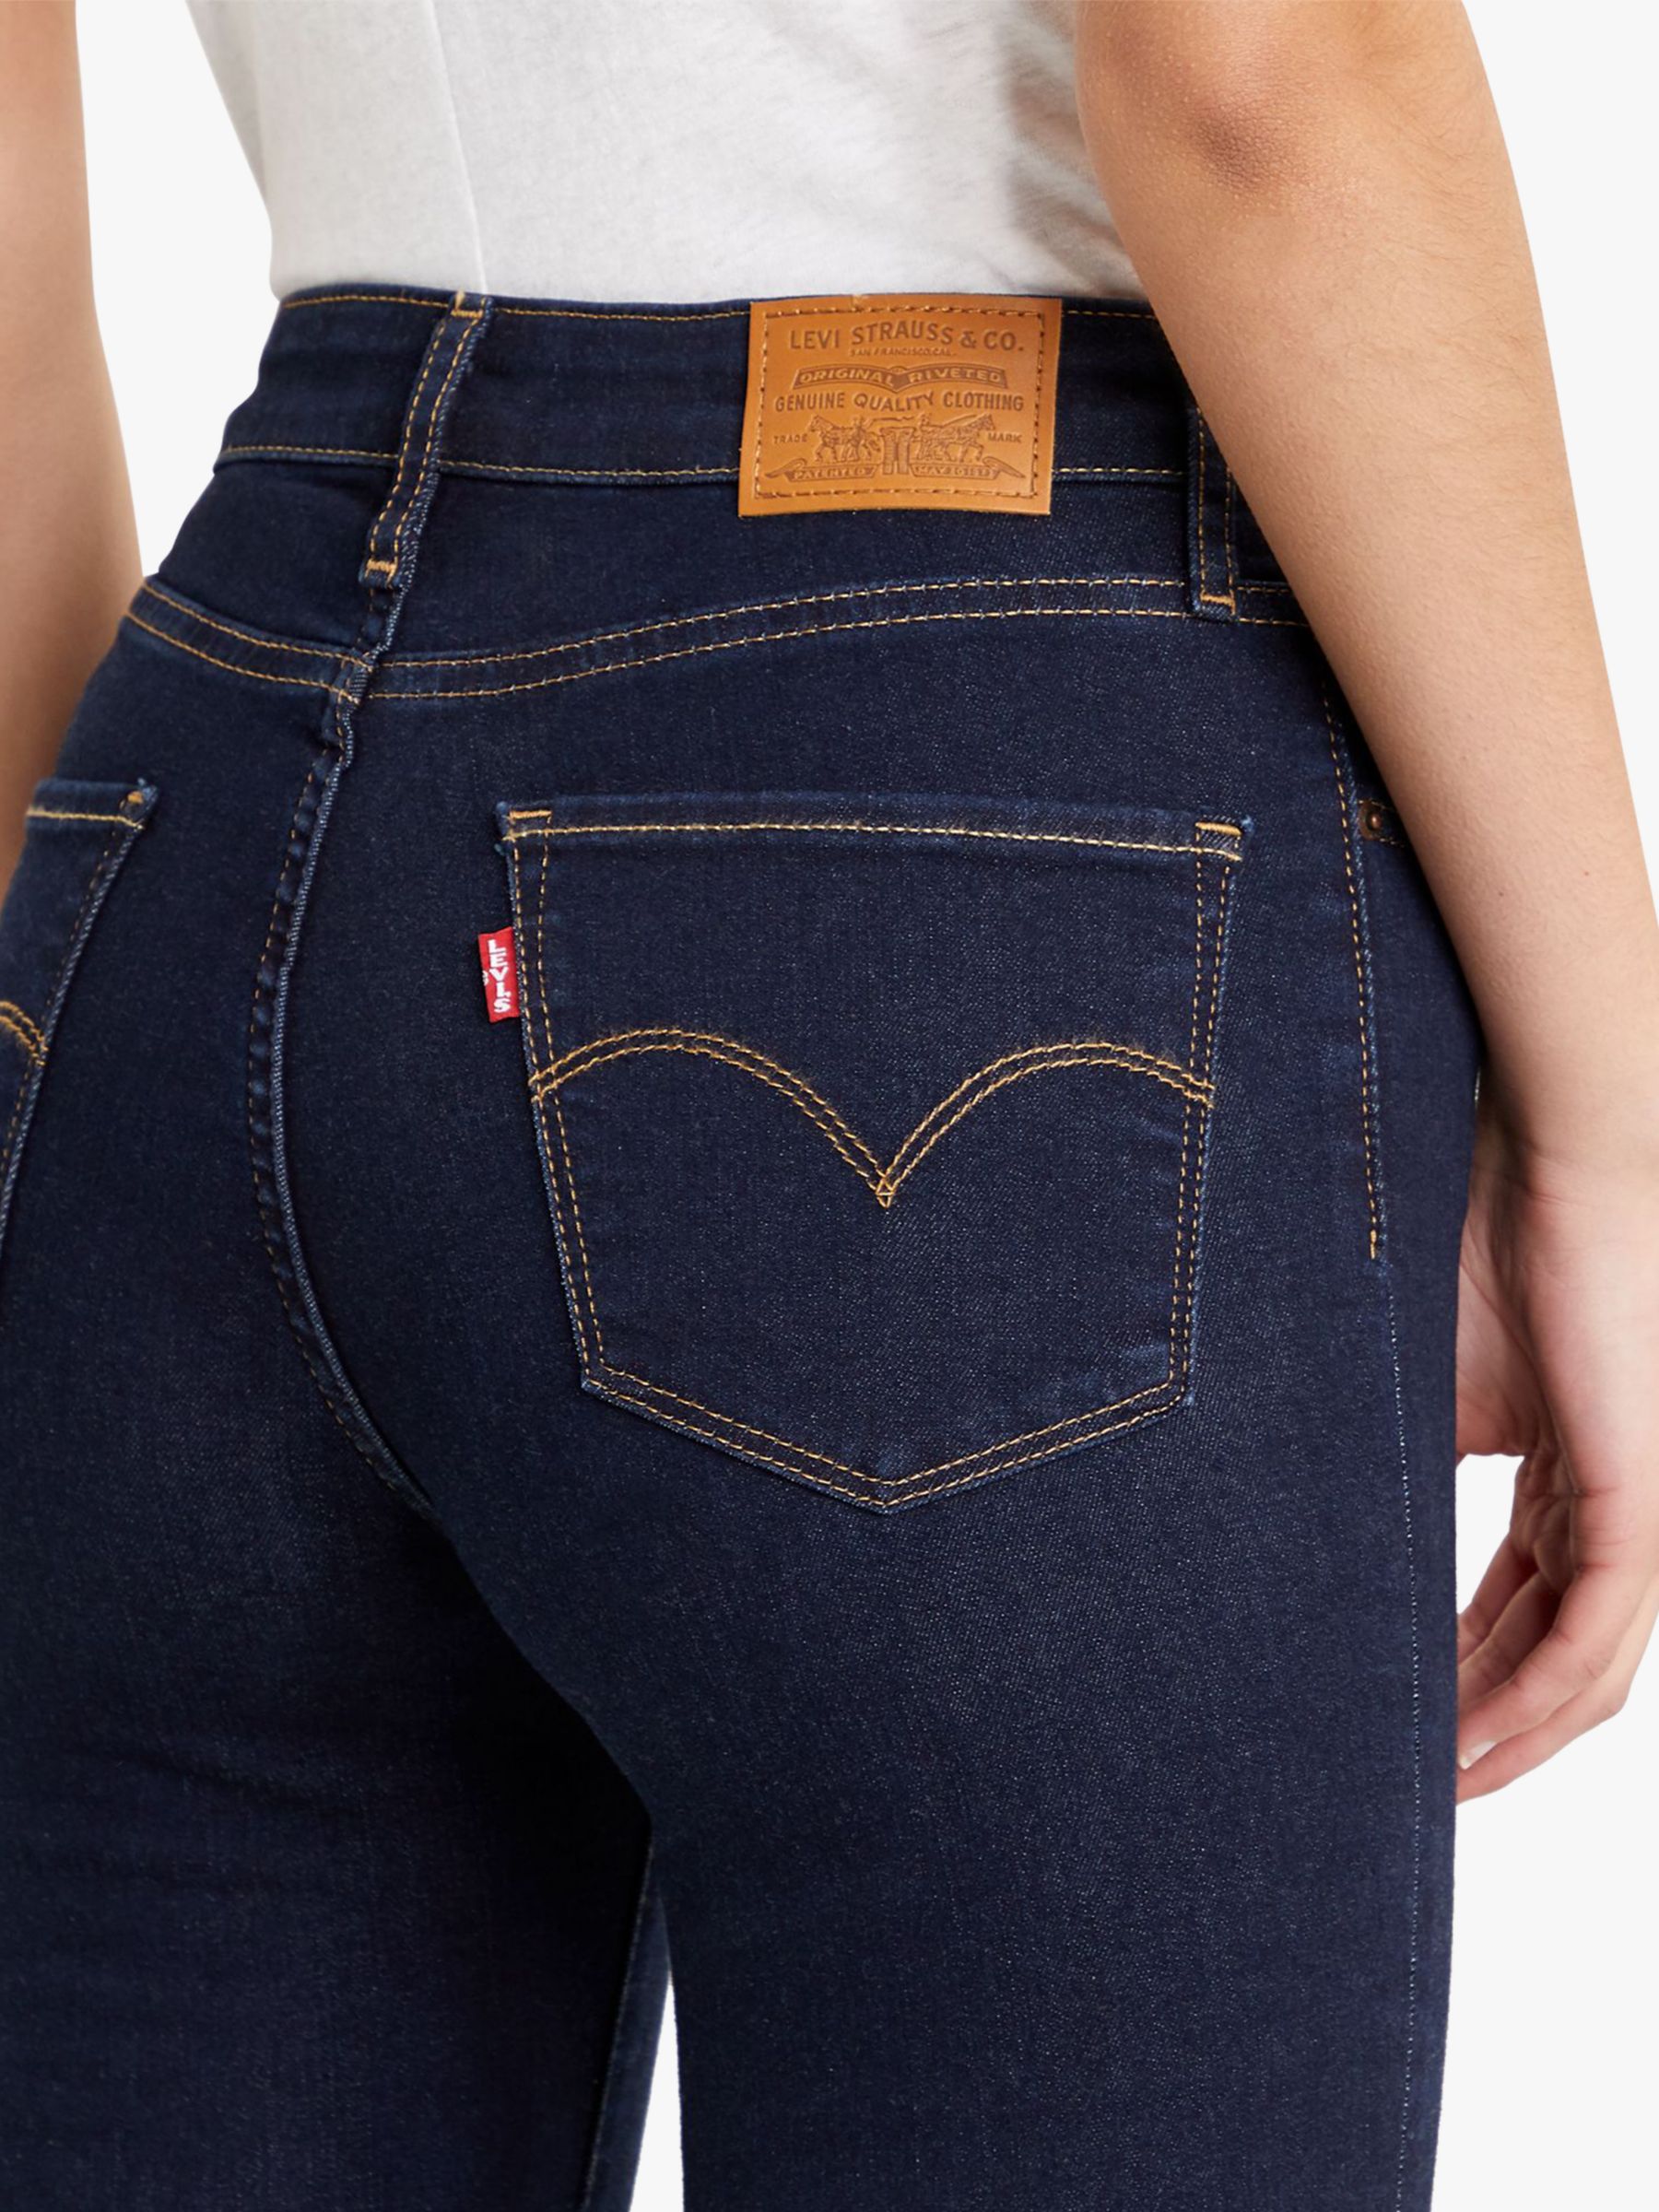 Levi's 725 High Rise Boot Cut Jeans, To The Nine at John Lewis